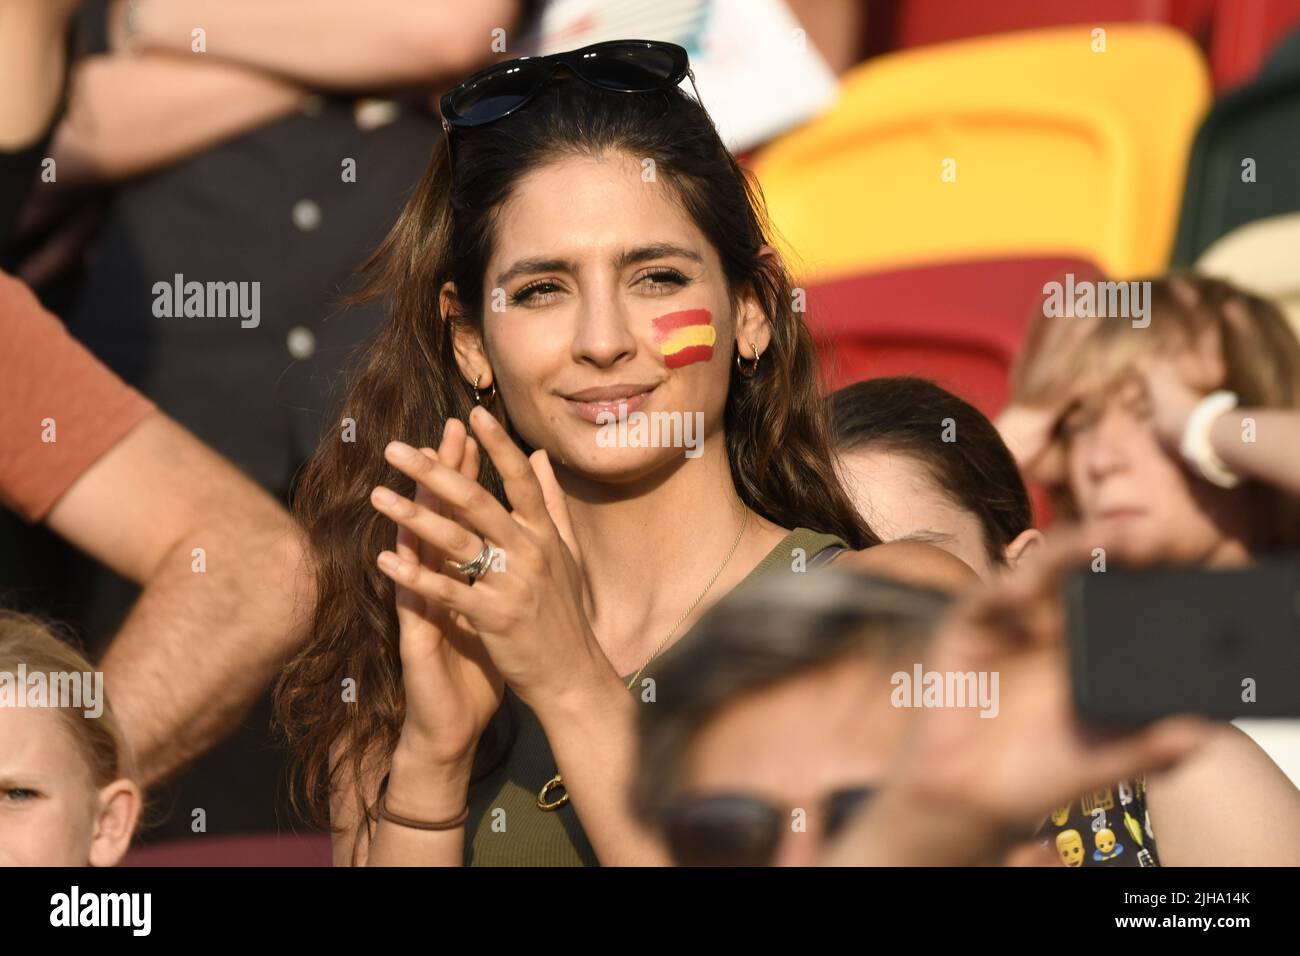 London, UK. 16th July, 2022. Supporters (Spain Women) during the Uefa Women s Euro England 2022 match between Denmark 0-1 Spain at Brentford Community Stadium on July 16 2022 in London England. Credit: Maurizio Borsari/AFLO/Alamy Live News Stock Photo